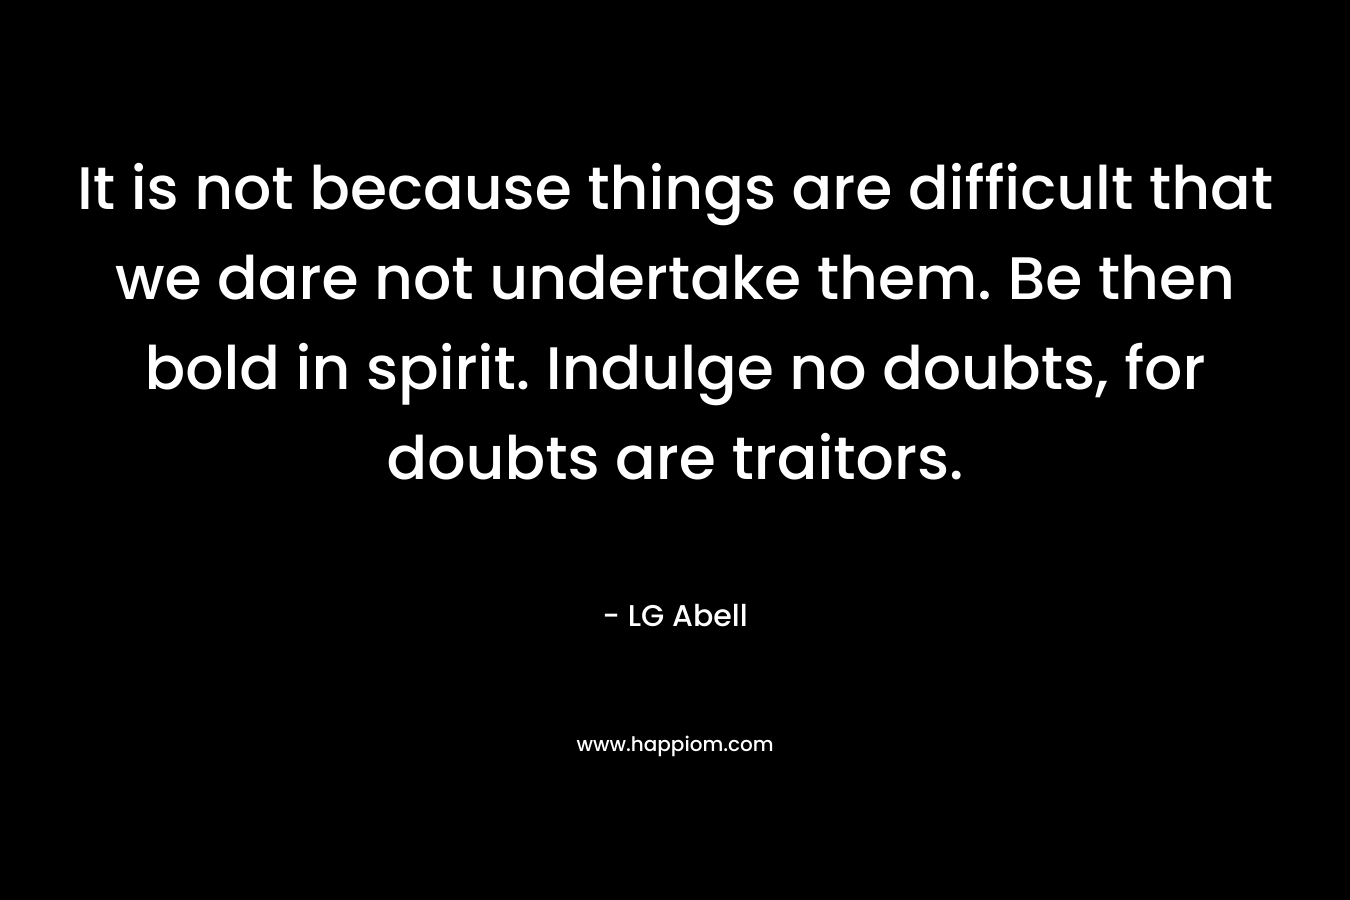 It is not because things are difficult that we dare not undertake them. Be then bold in spirit. Indulge no doubts, for doubts are traitors. – LG Abell